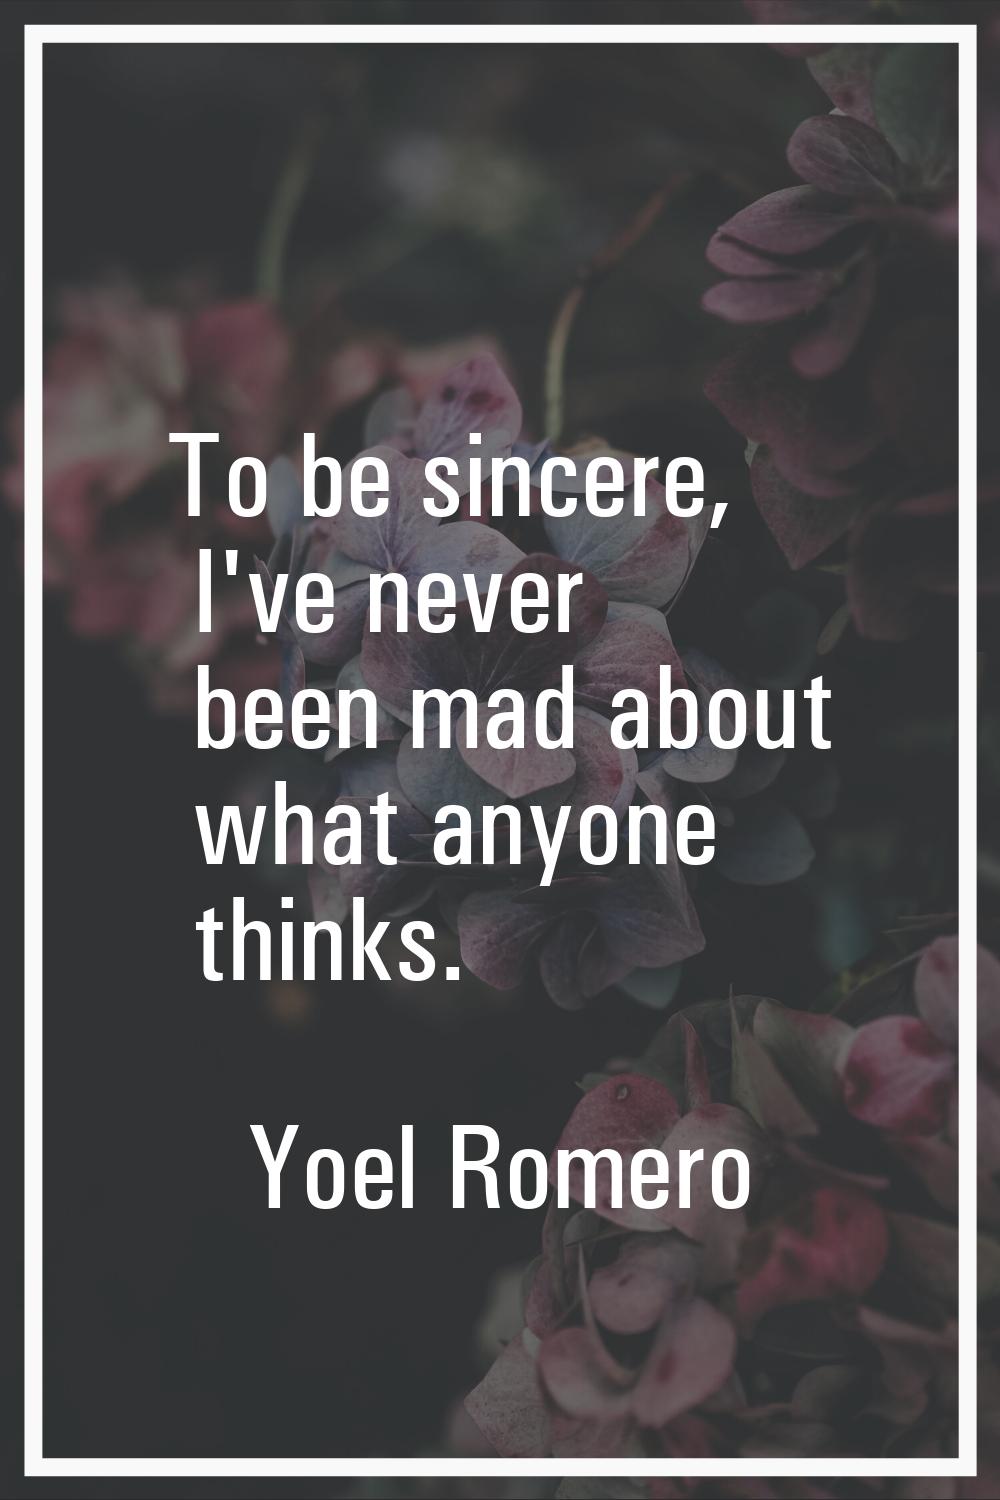 To be sincere, I've never been mad about what anyone thinks.